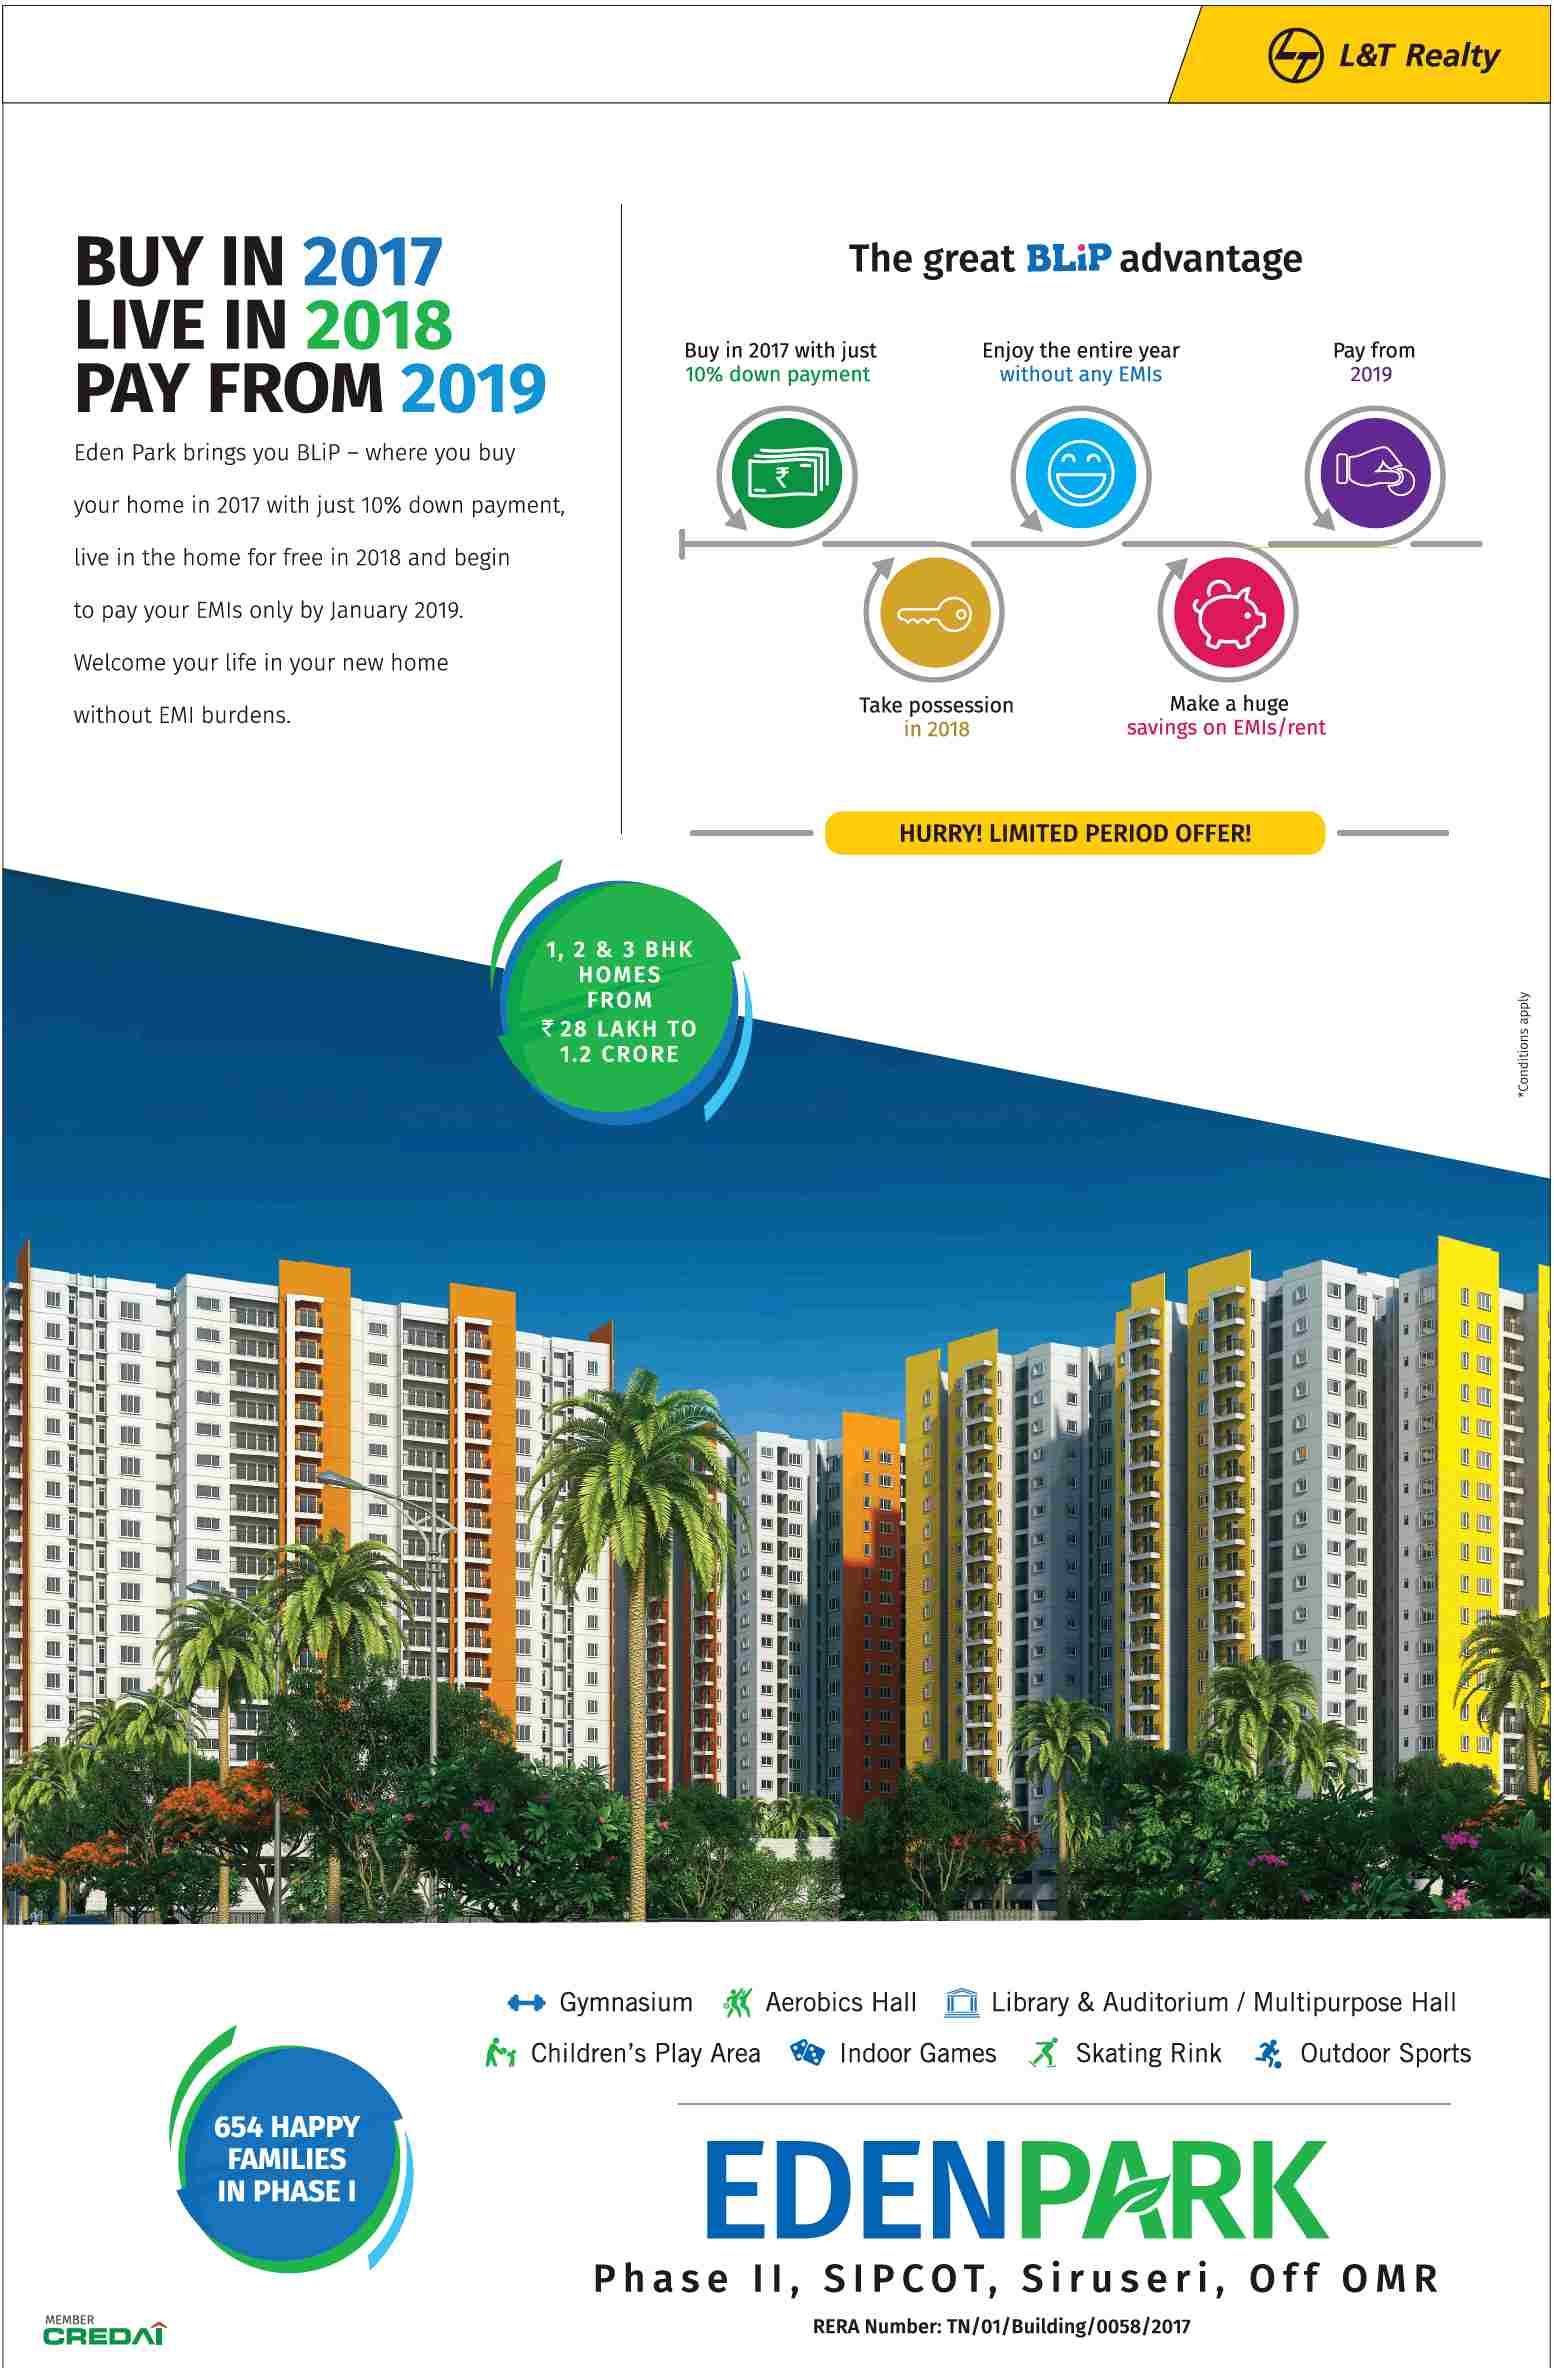 Avail The great BLIP advantage at L And T Eden Park in  Chennai